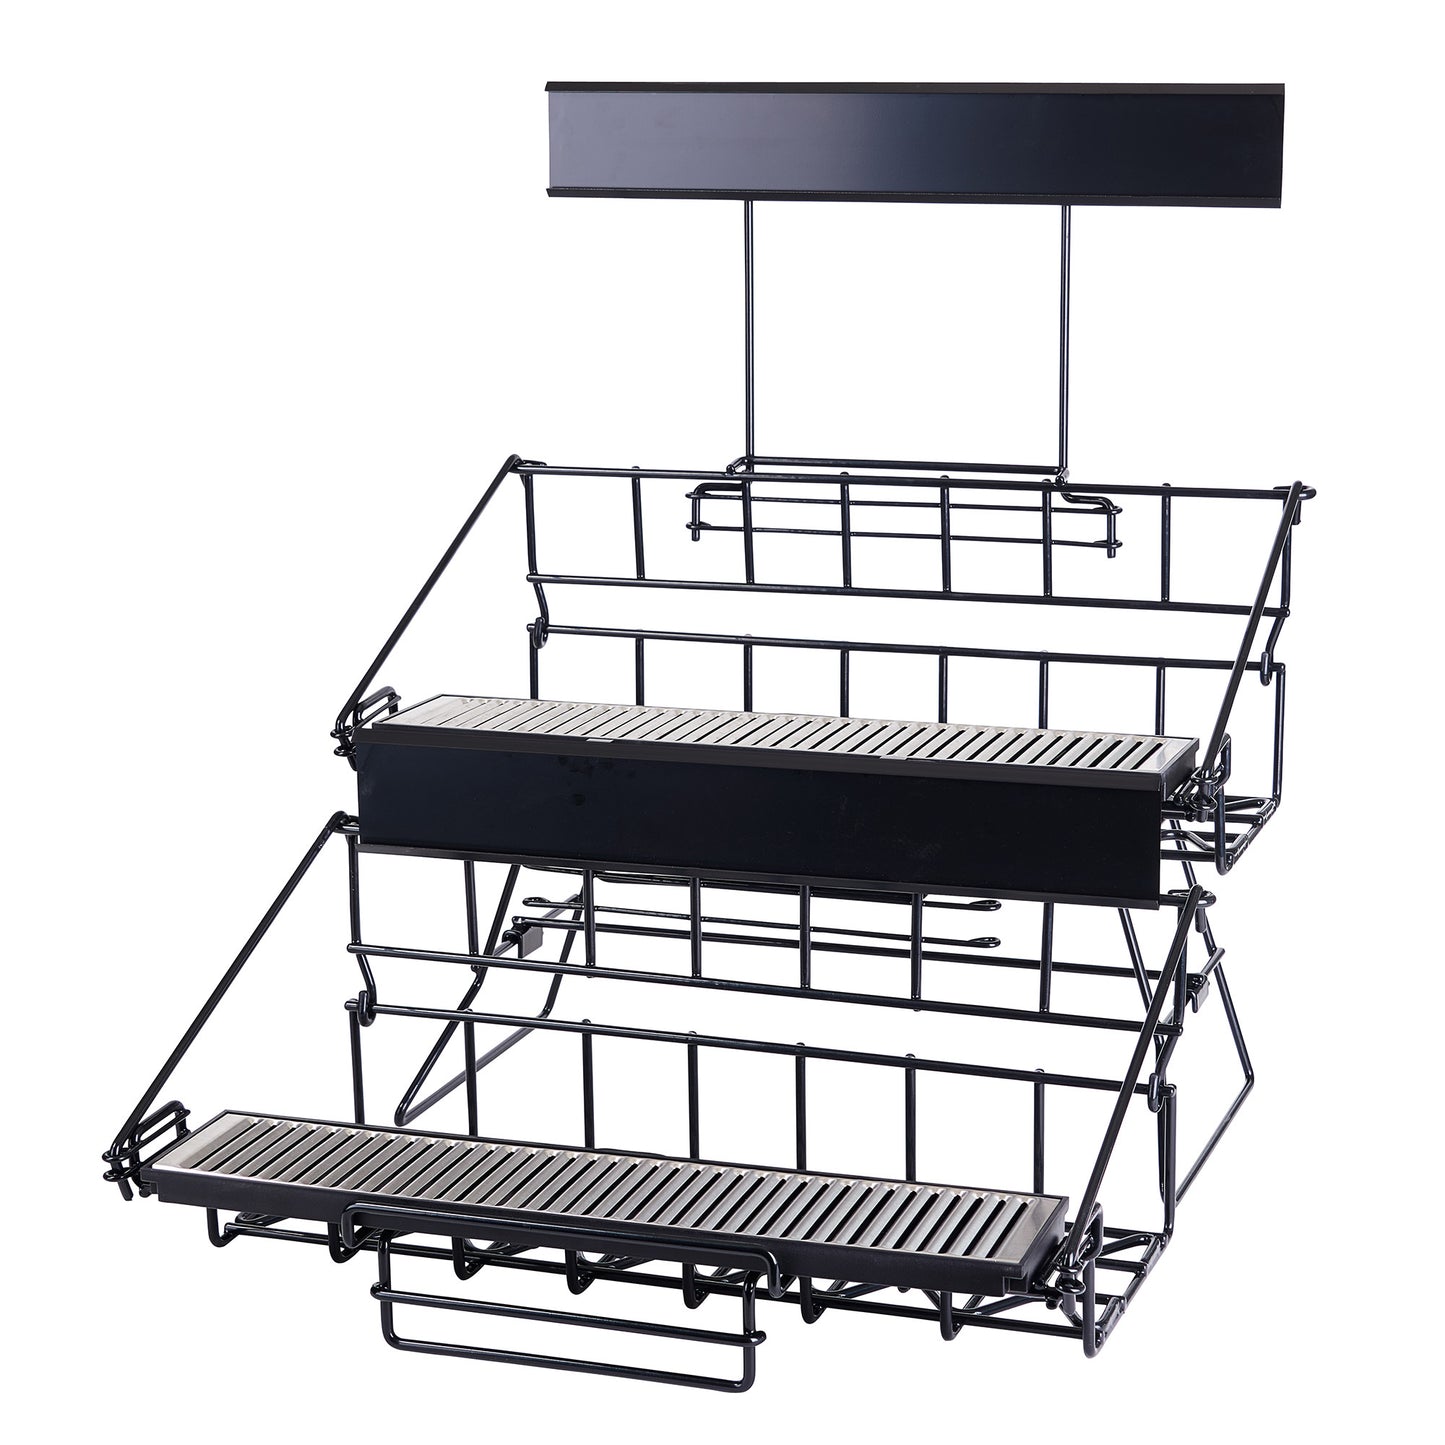 APRK-6 - Two-Level Rack Holds 6 Airpots